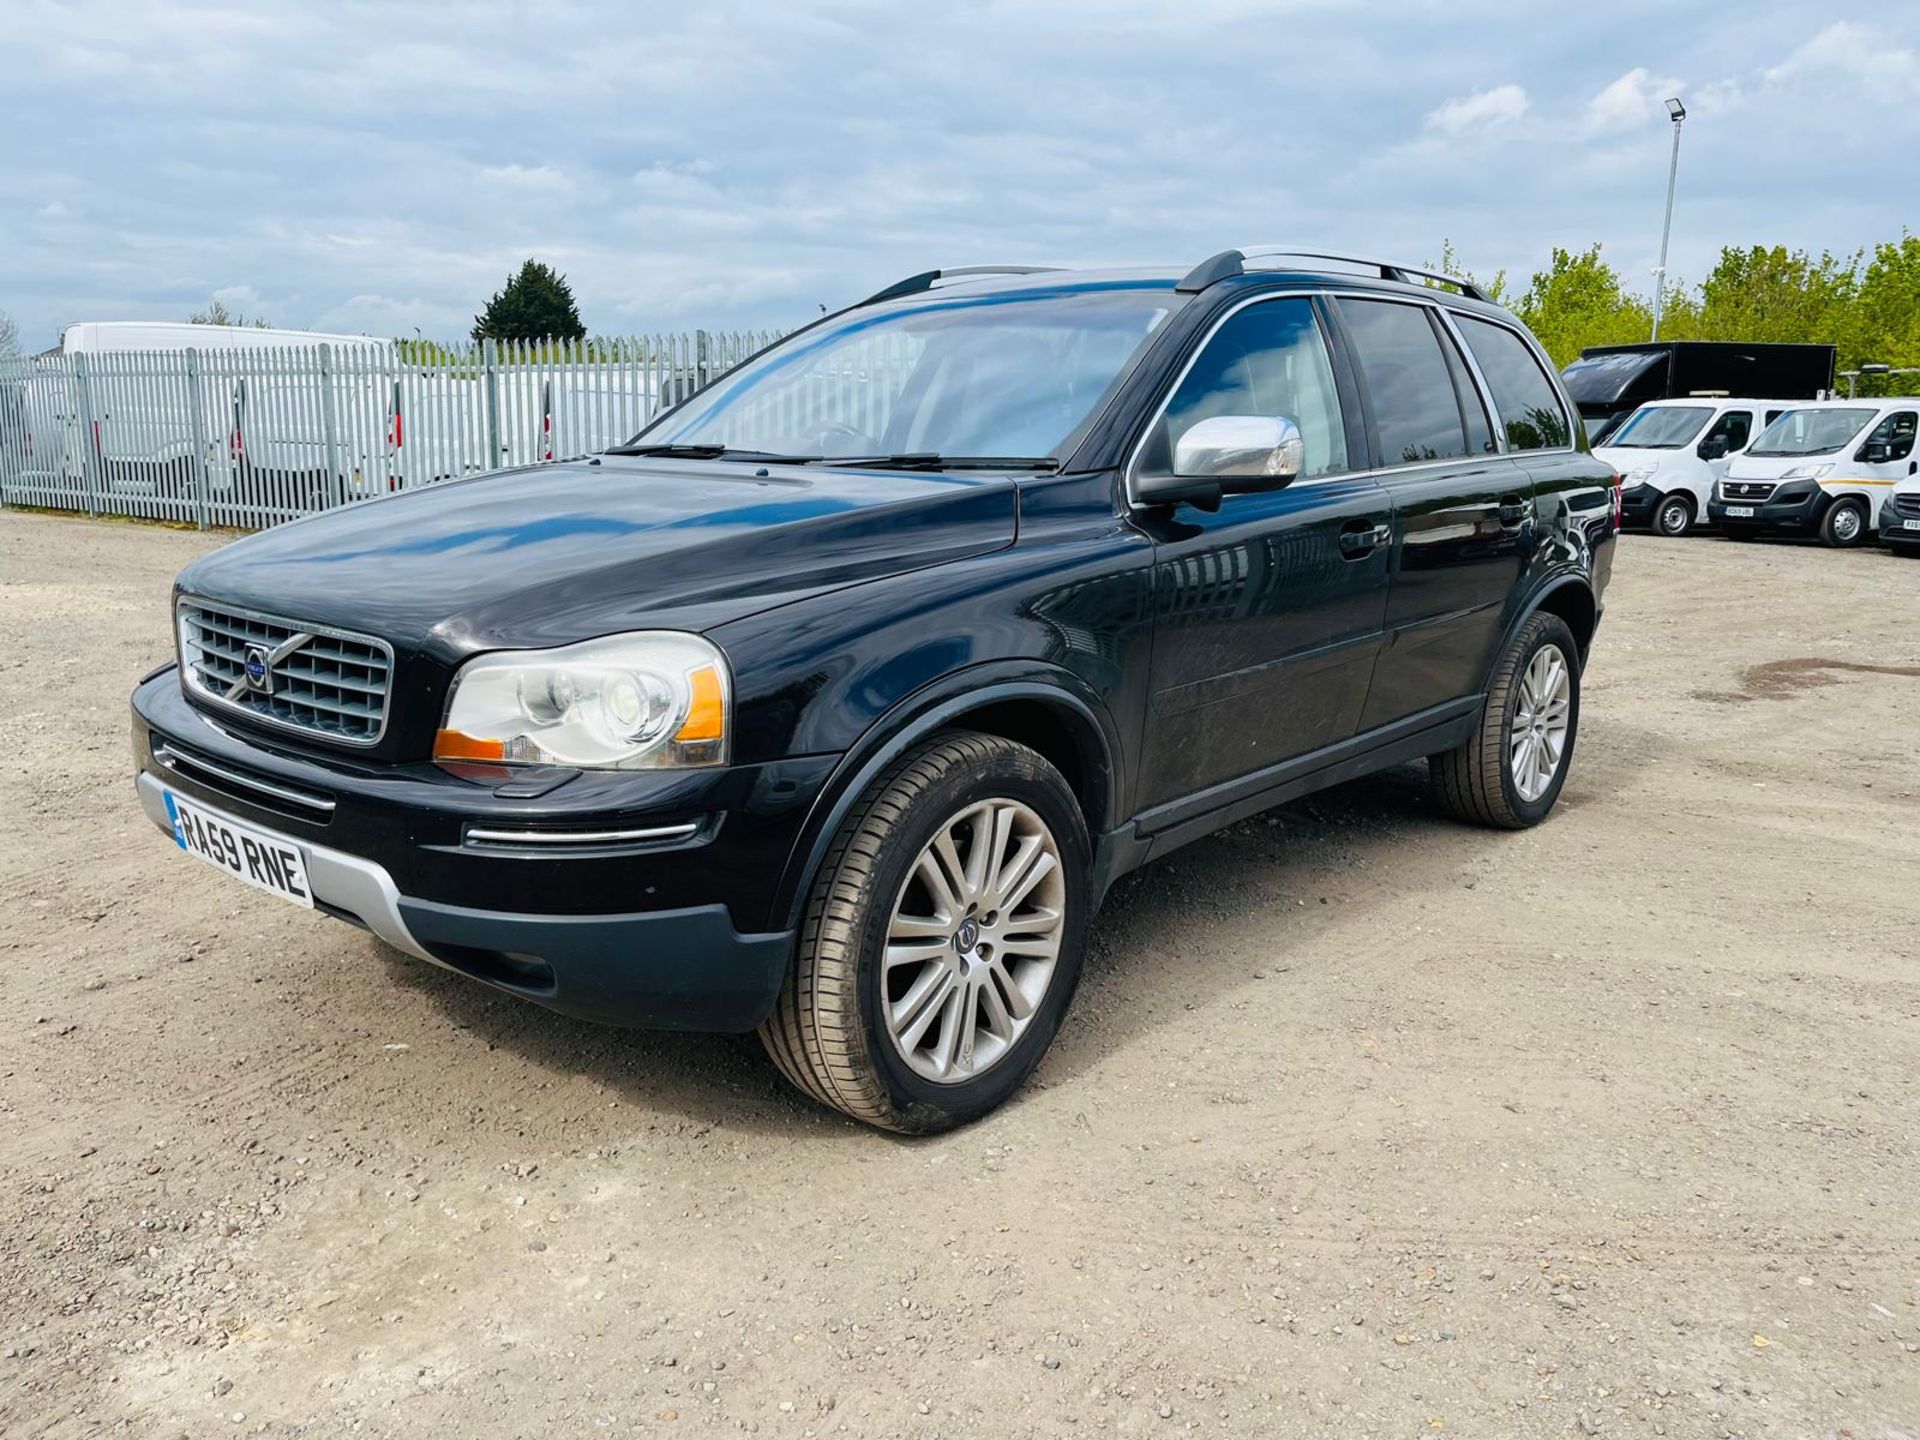 ** ON SALE ** Volvo XC90 2.4 D5 185 Executive G/T Estate 2009 '59 plate' - Climate Control - Image 3 of 31